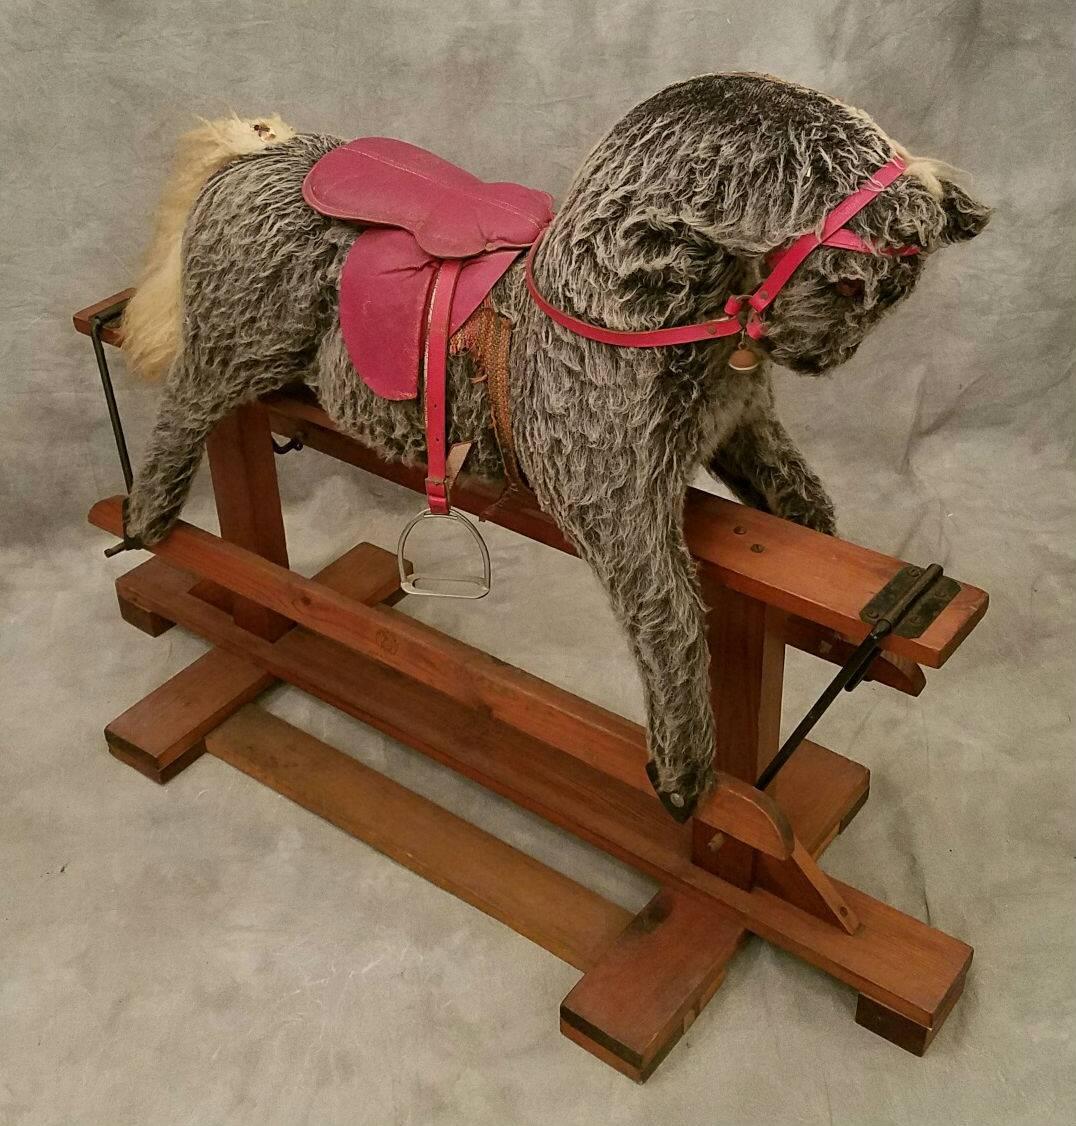 Vintage Pegasus gliding rocking horse with leather saddle and metal stirrups on a wood glide and base.